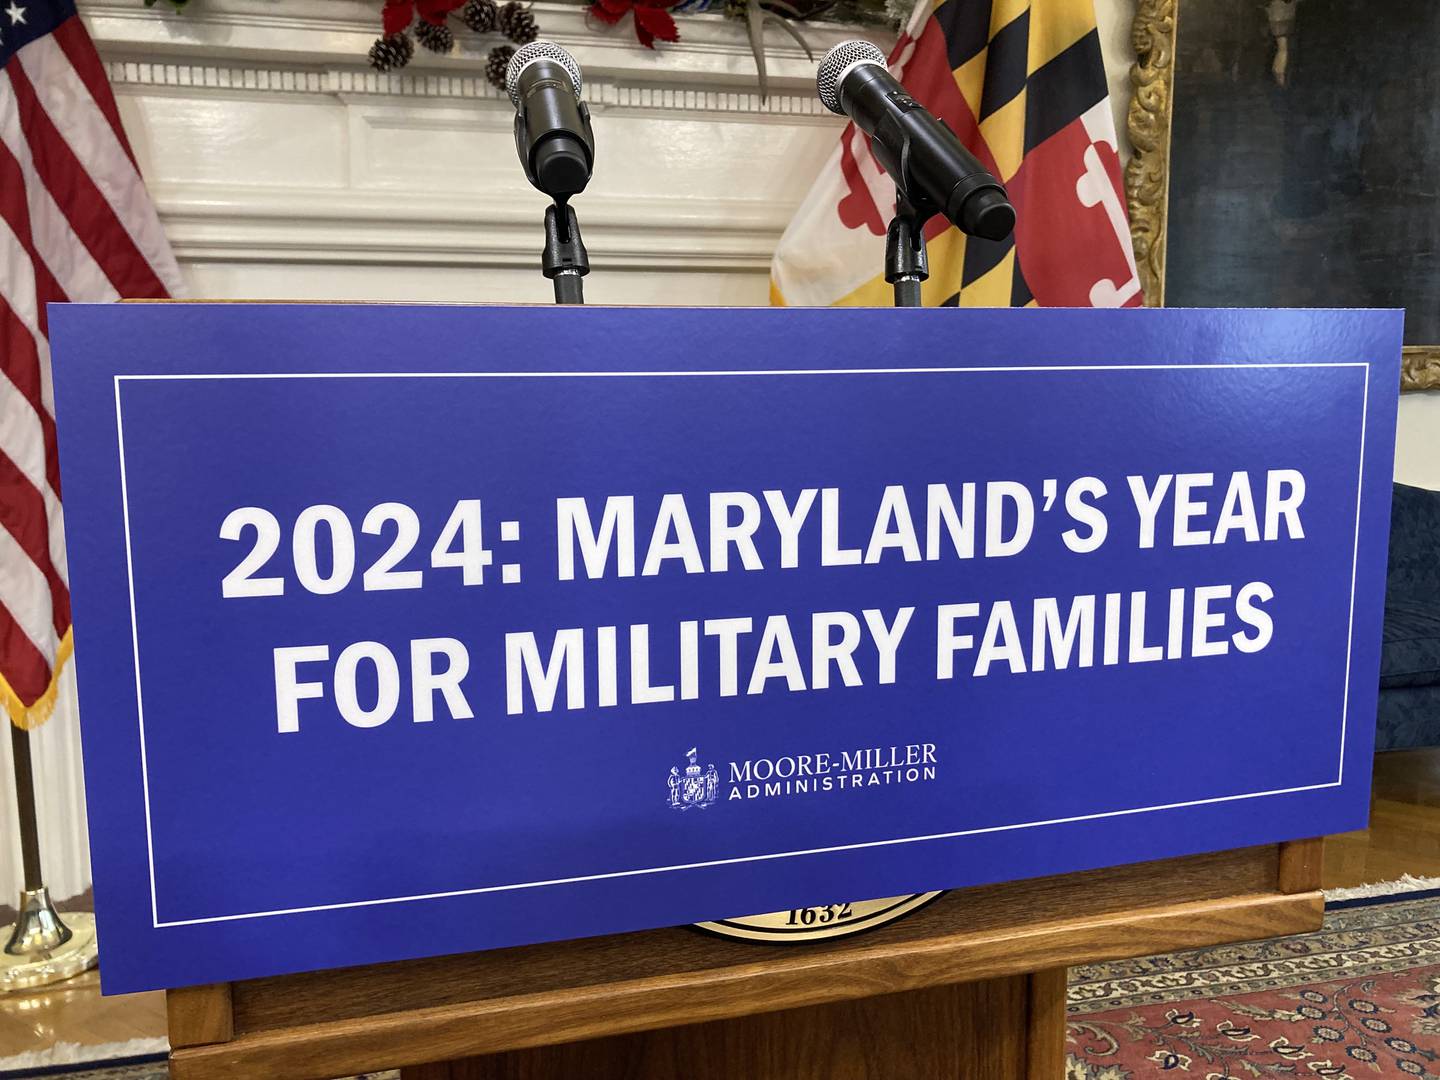 Gov. Wes Moore says that 2024 will be "Maryland's year for military families." He unveiled legislation to support military members and their families during a State House news conference on Dec. 13, 2023.